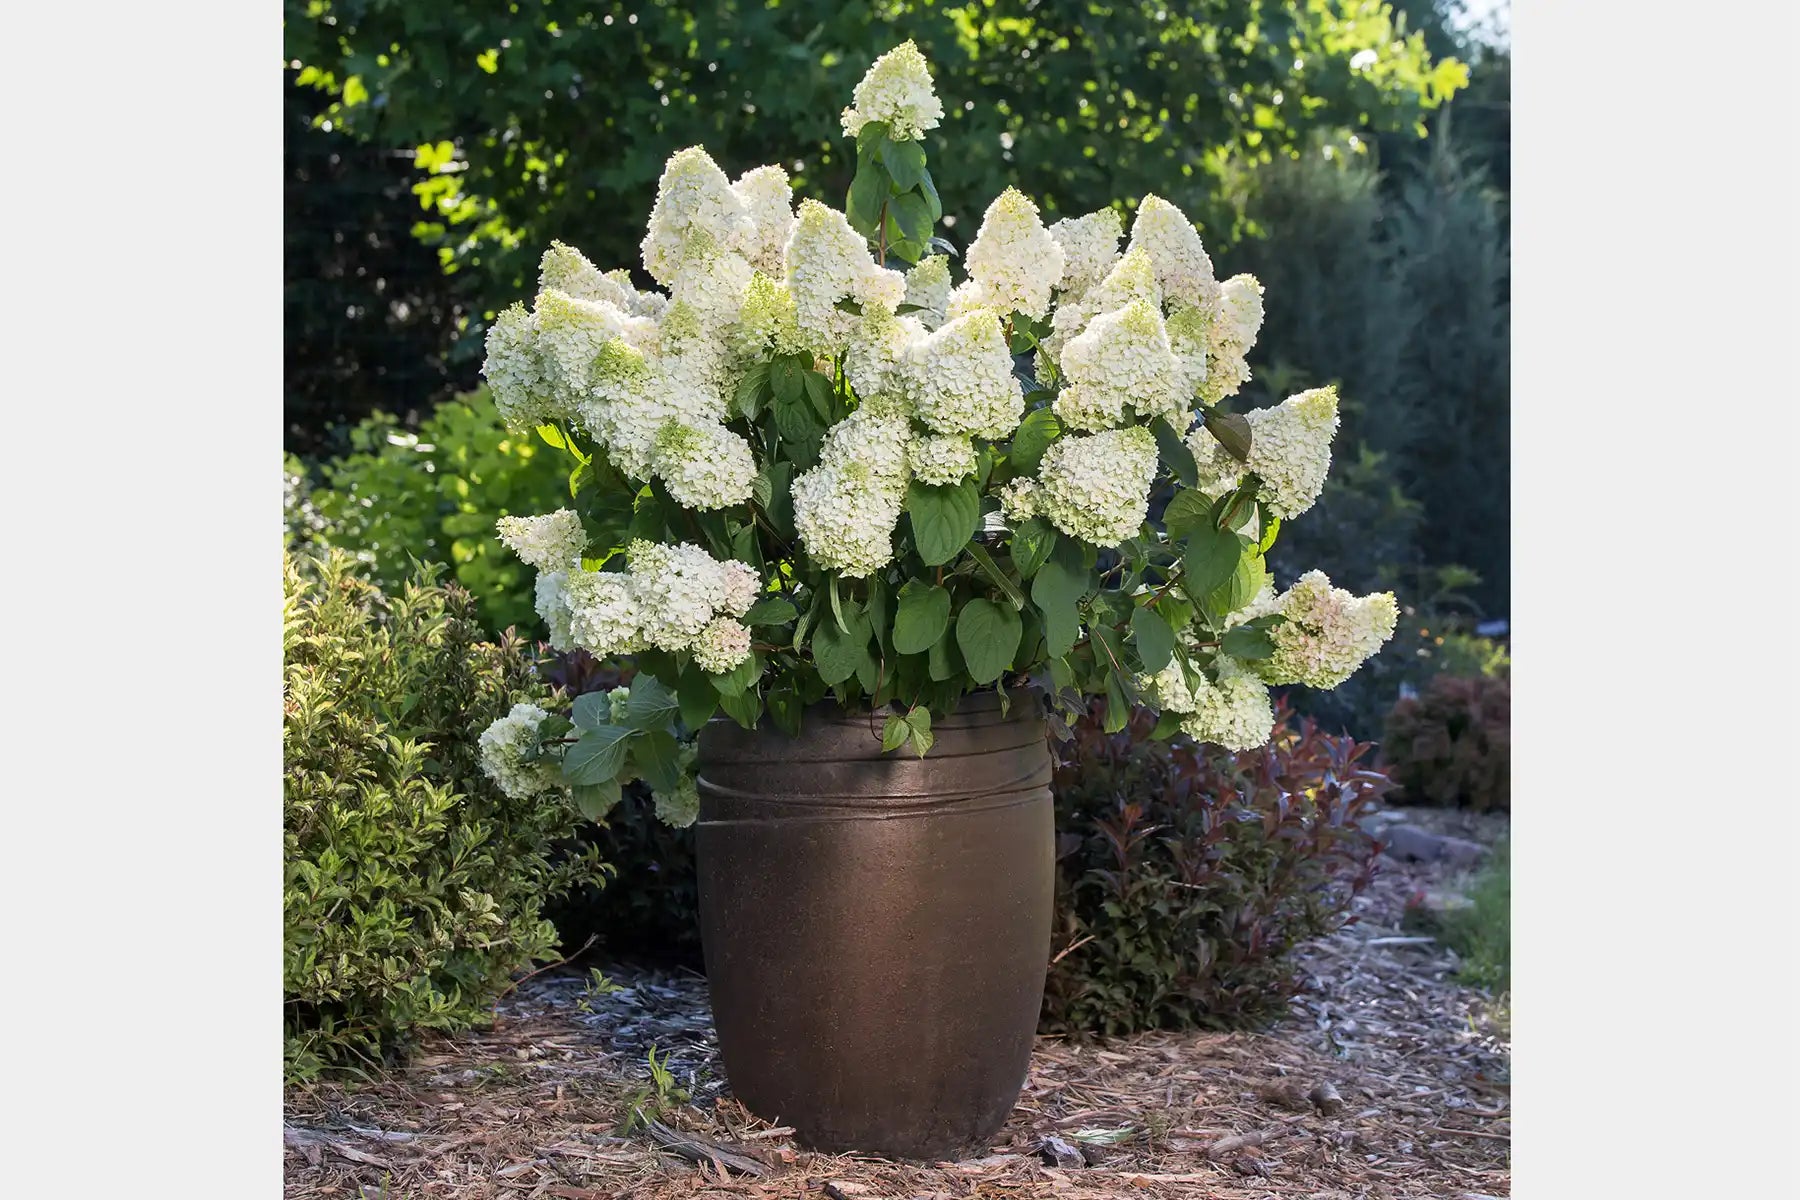 The large clusters of large white blooms of Little Hottie® Hydrangea. Little Hottie®, completely at home in a container, inside or outside. This Little Hottie container sits on dark natural mulch in front of a background of green trees.